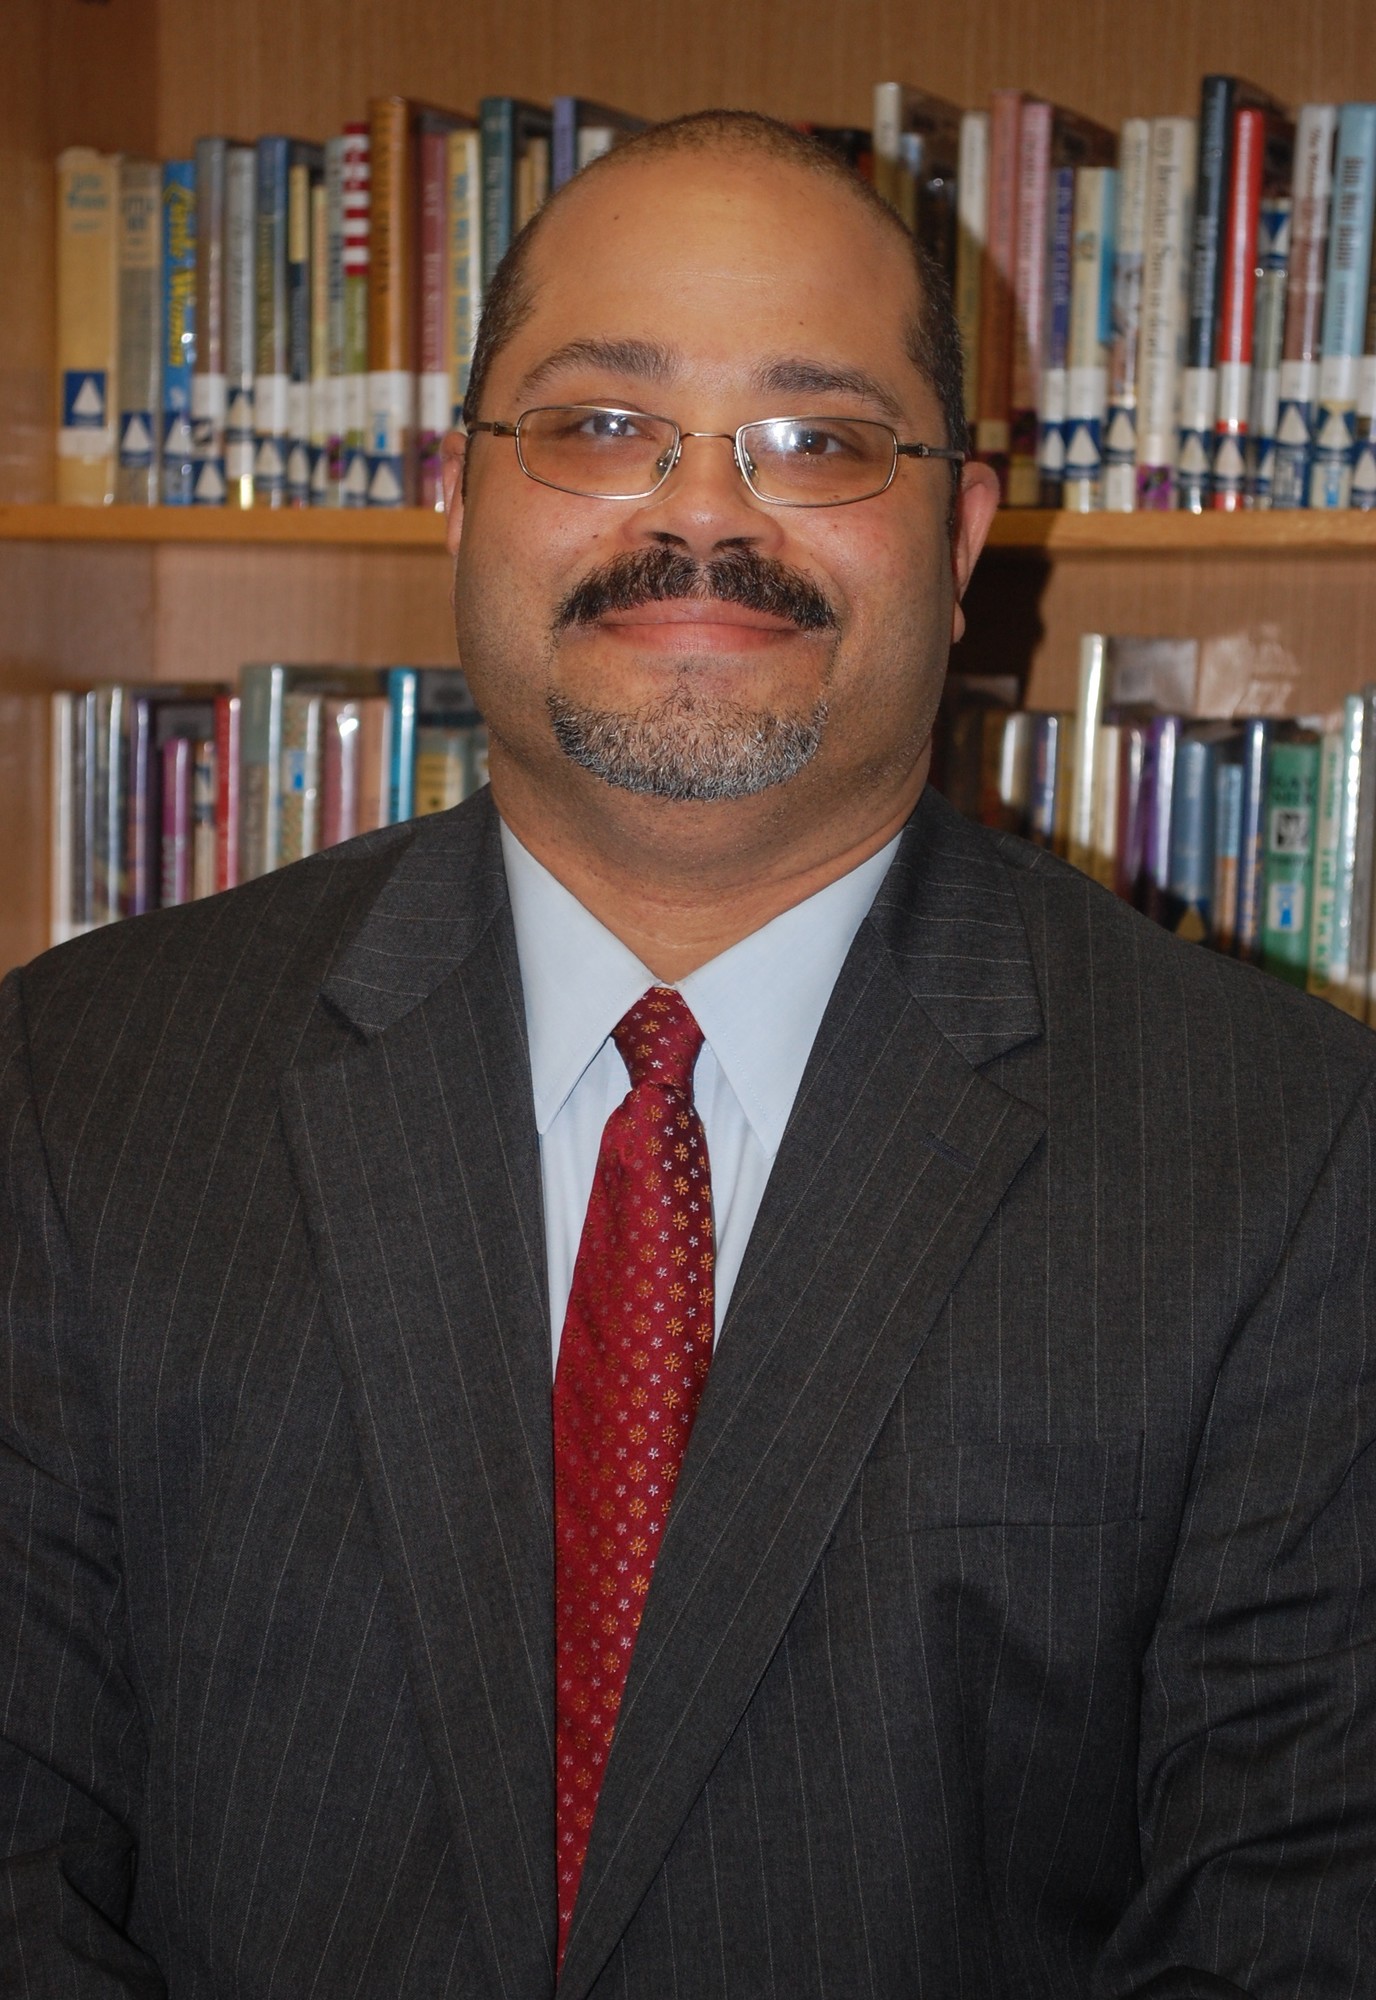 Cristobal Stewart joins the high school board from District 30 and will be president of the elementary board.